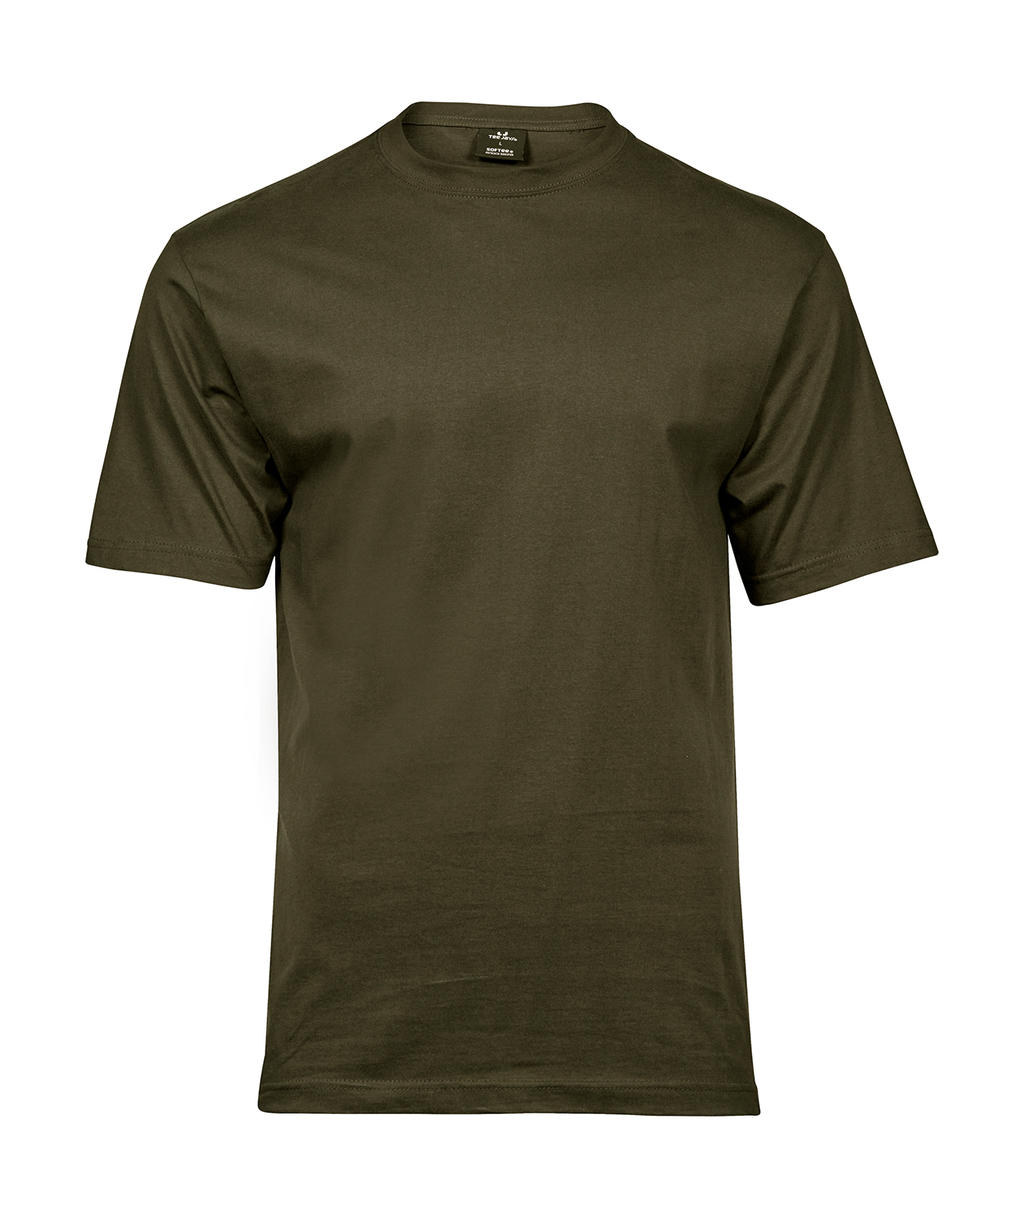  Sof Tee in Farbe Olive